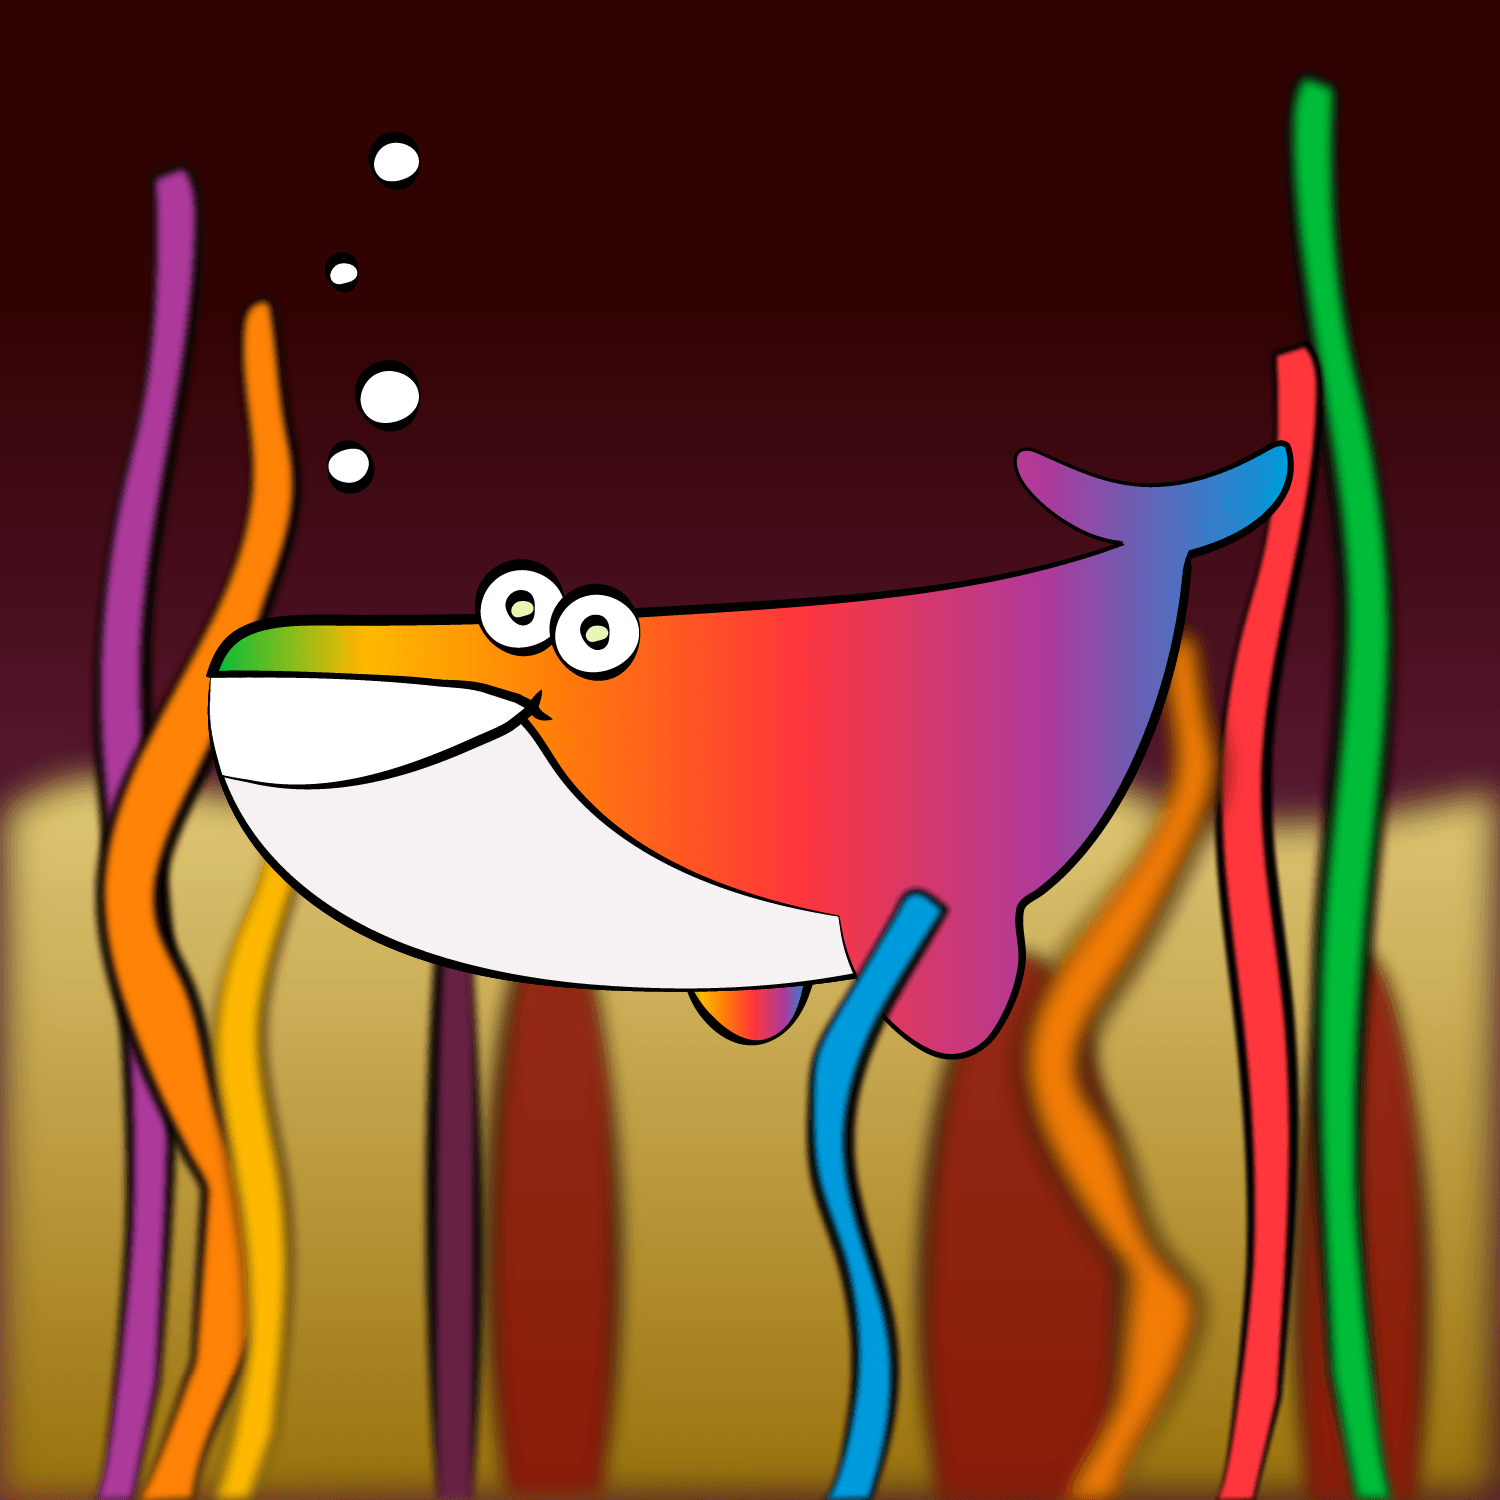 The colorful whale #51